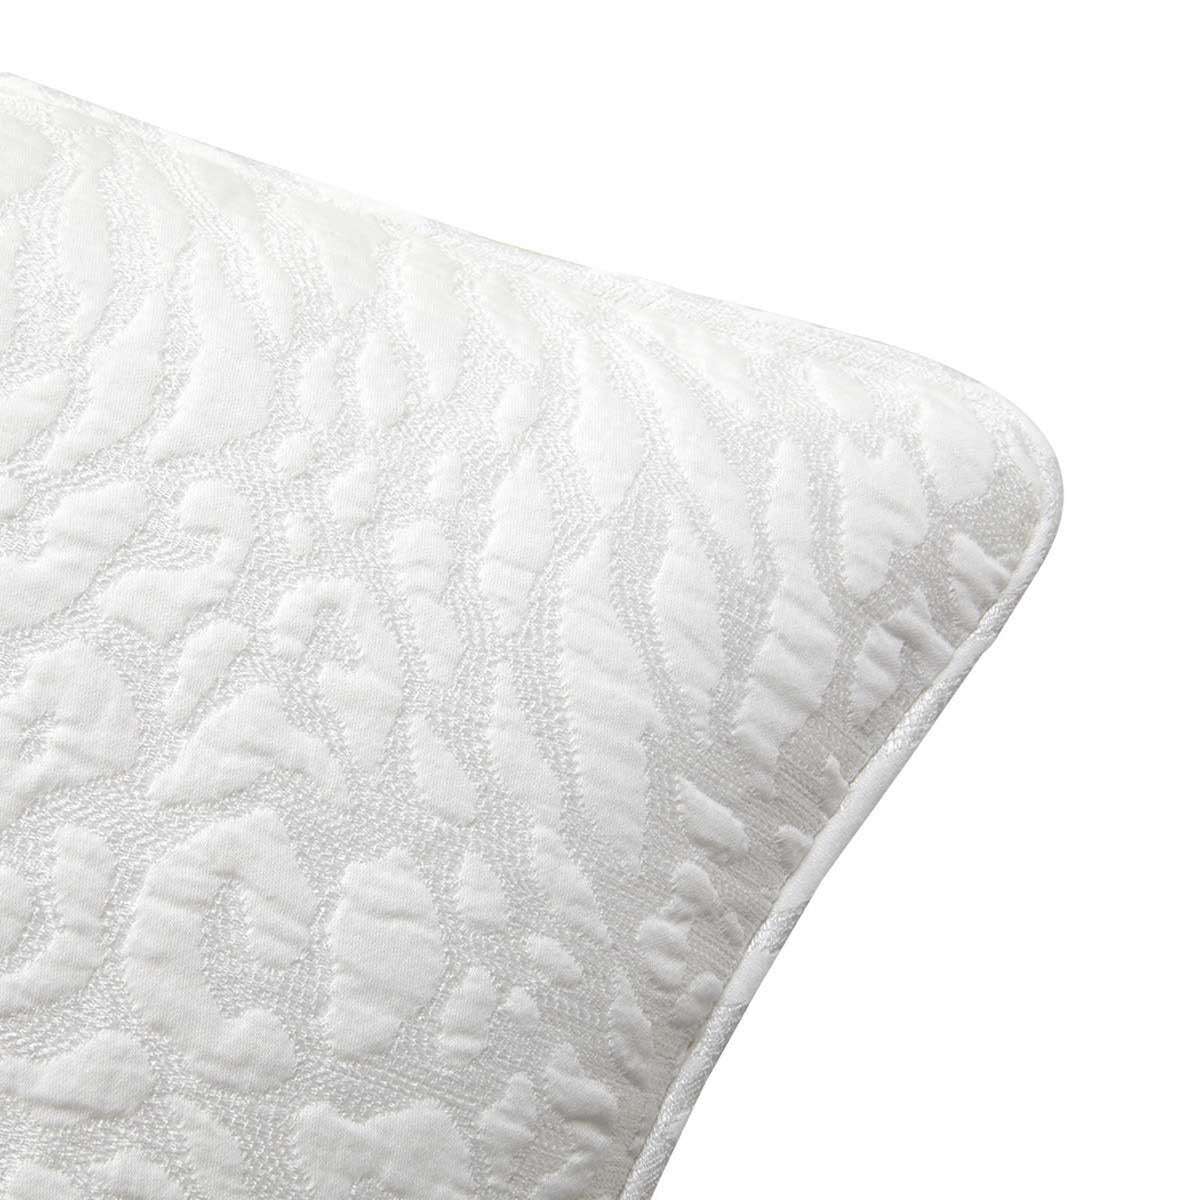 Close Up Image of Yves Delorme Souvenir Decorative Pillow in Blanc Color